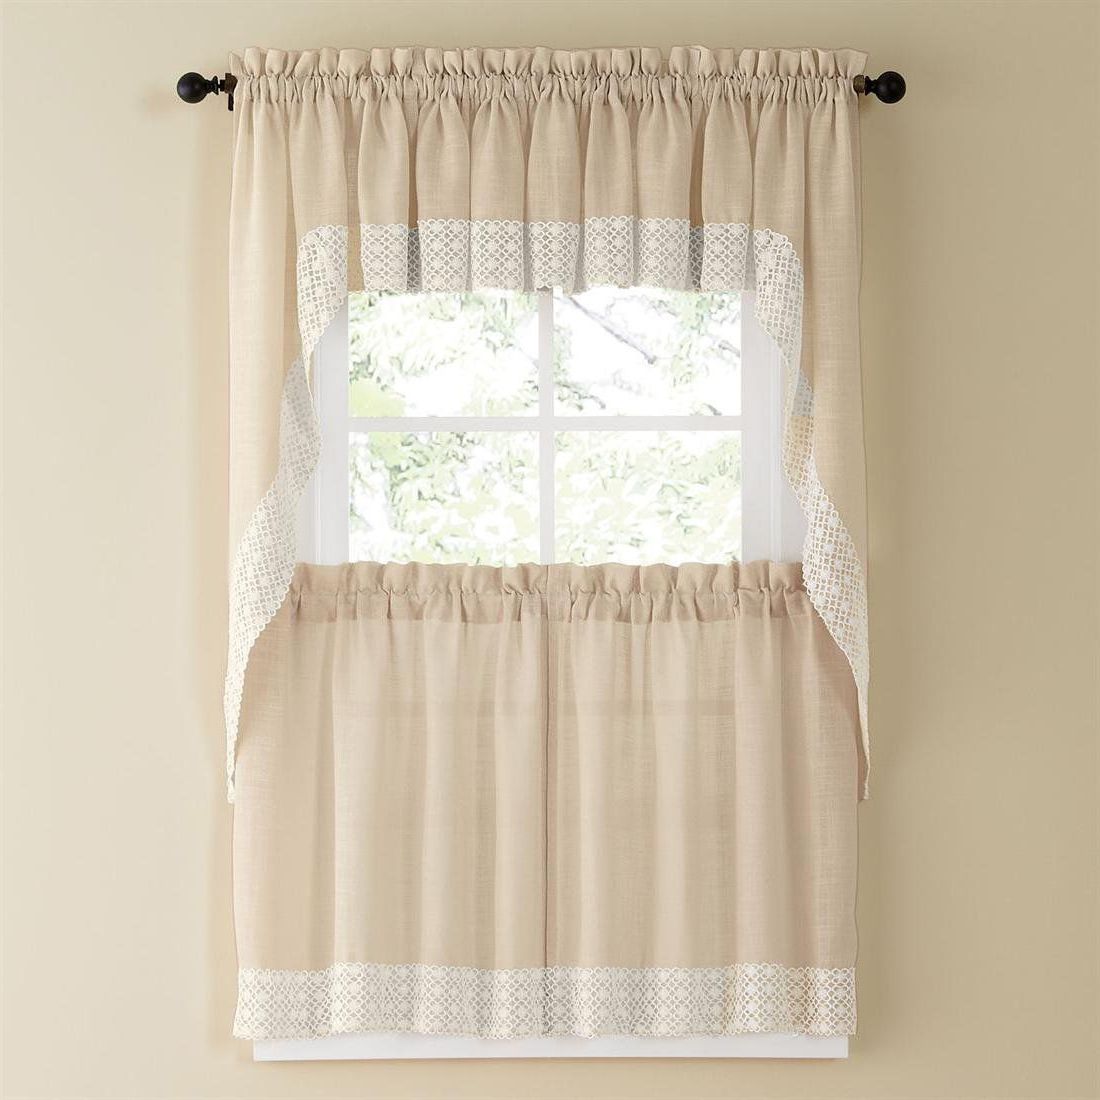 French Vanilla Country Style Curtain Parts With White Daisy Lace Accent Within Best And Newest French Vanilla Country Style Curtain Parts With White Daisy (View 1 of 20)